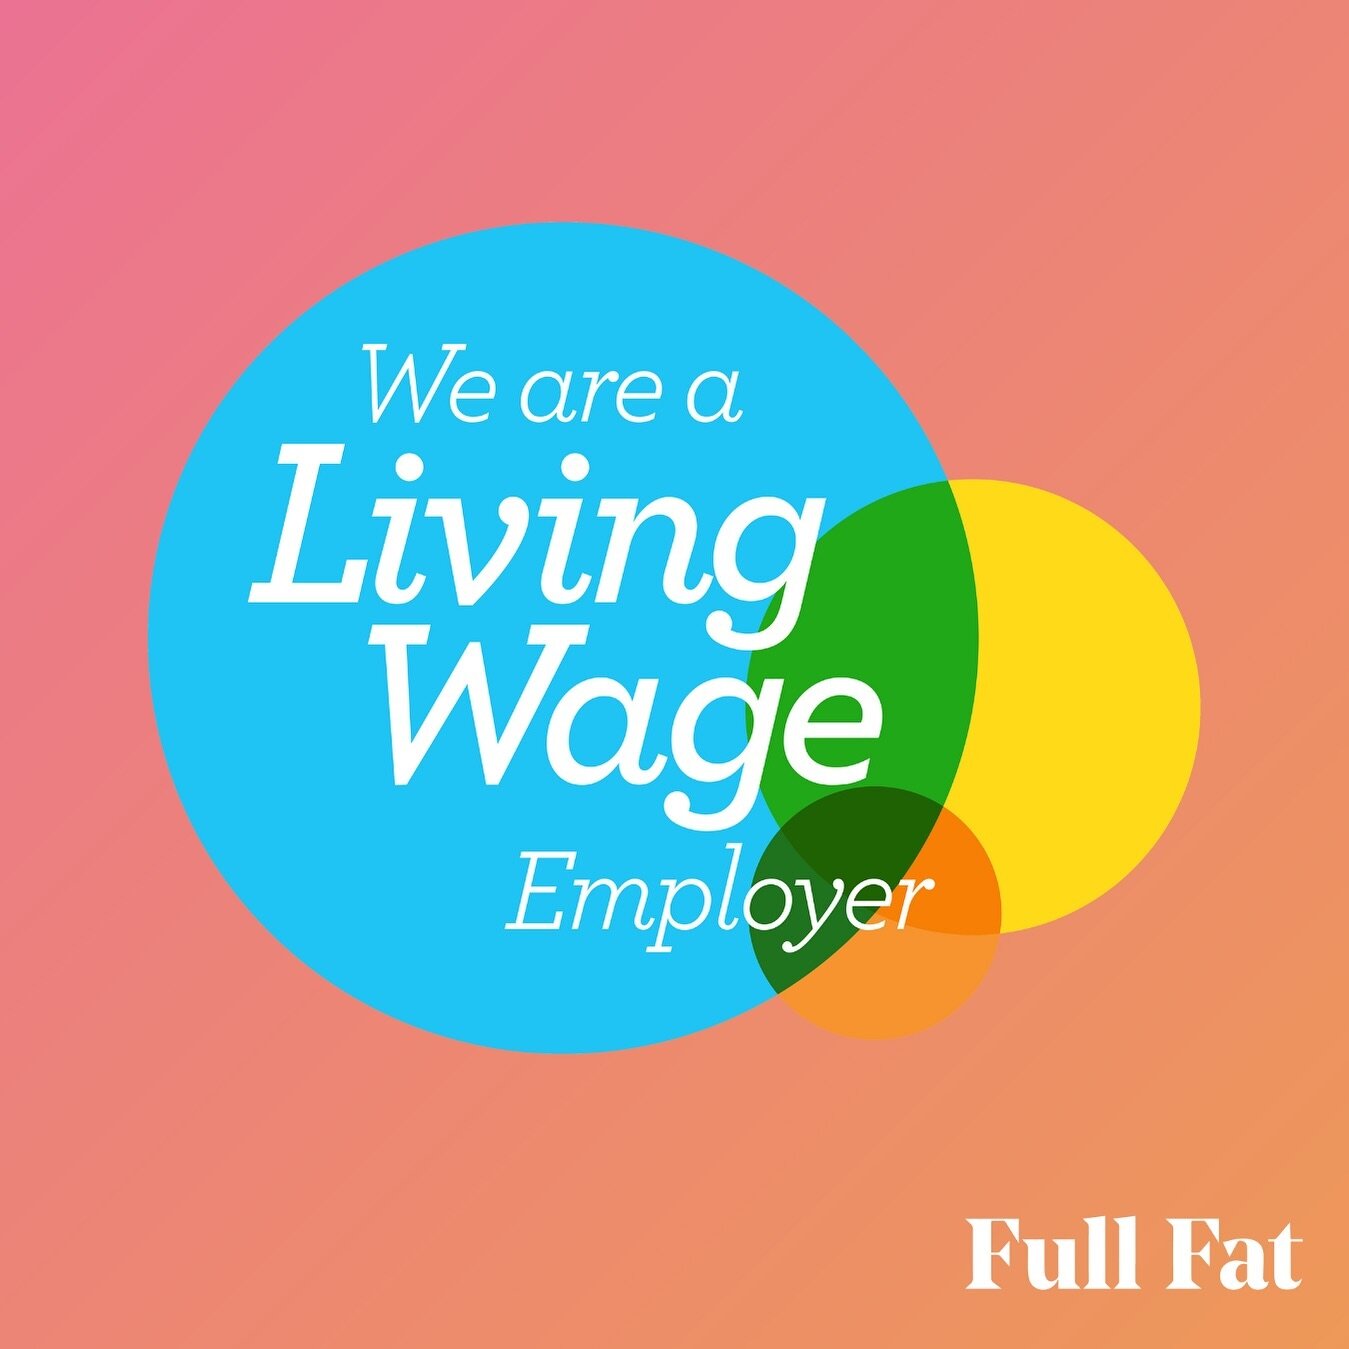 We are now (officially) able to say that Full Fat Agency has been certified as a London Living Wage Employer 🎉

This reflects our commitment to not only creating exceptional work, but also fostering a workplace that people are excited to be a part o